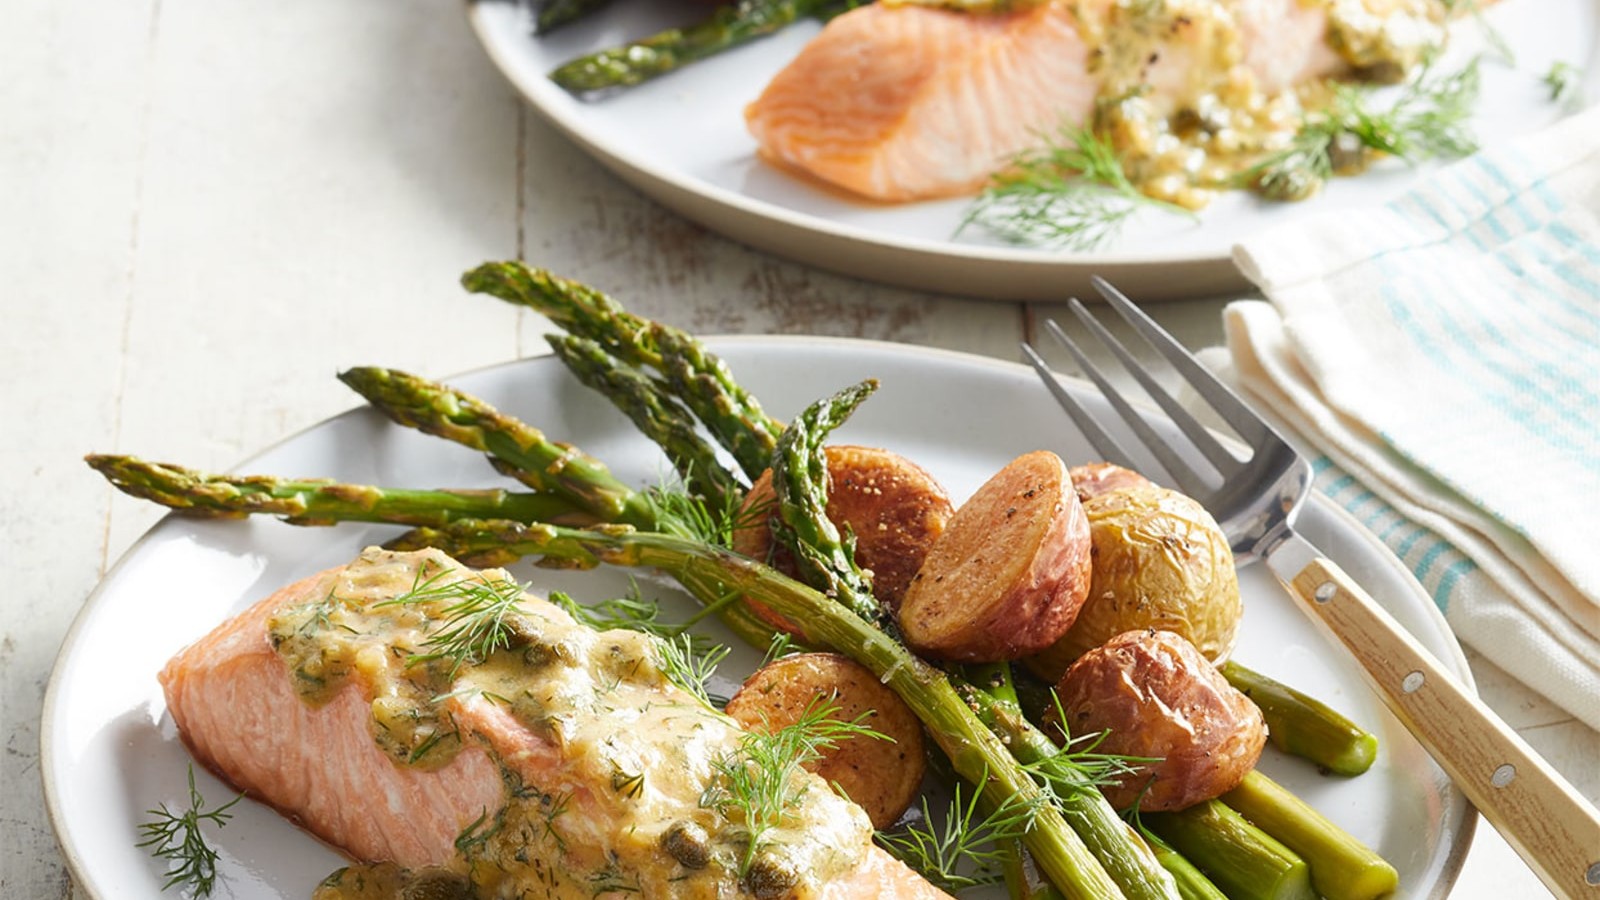 Image of Roasted Salmon & Asparagus with Dill-Mustard Sauce